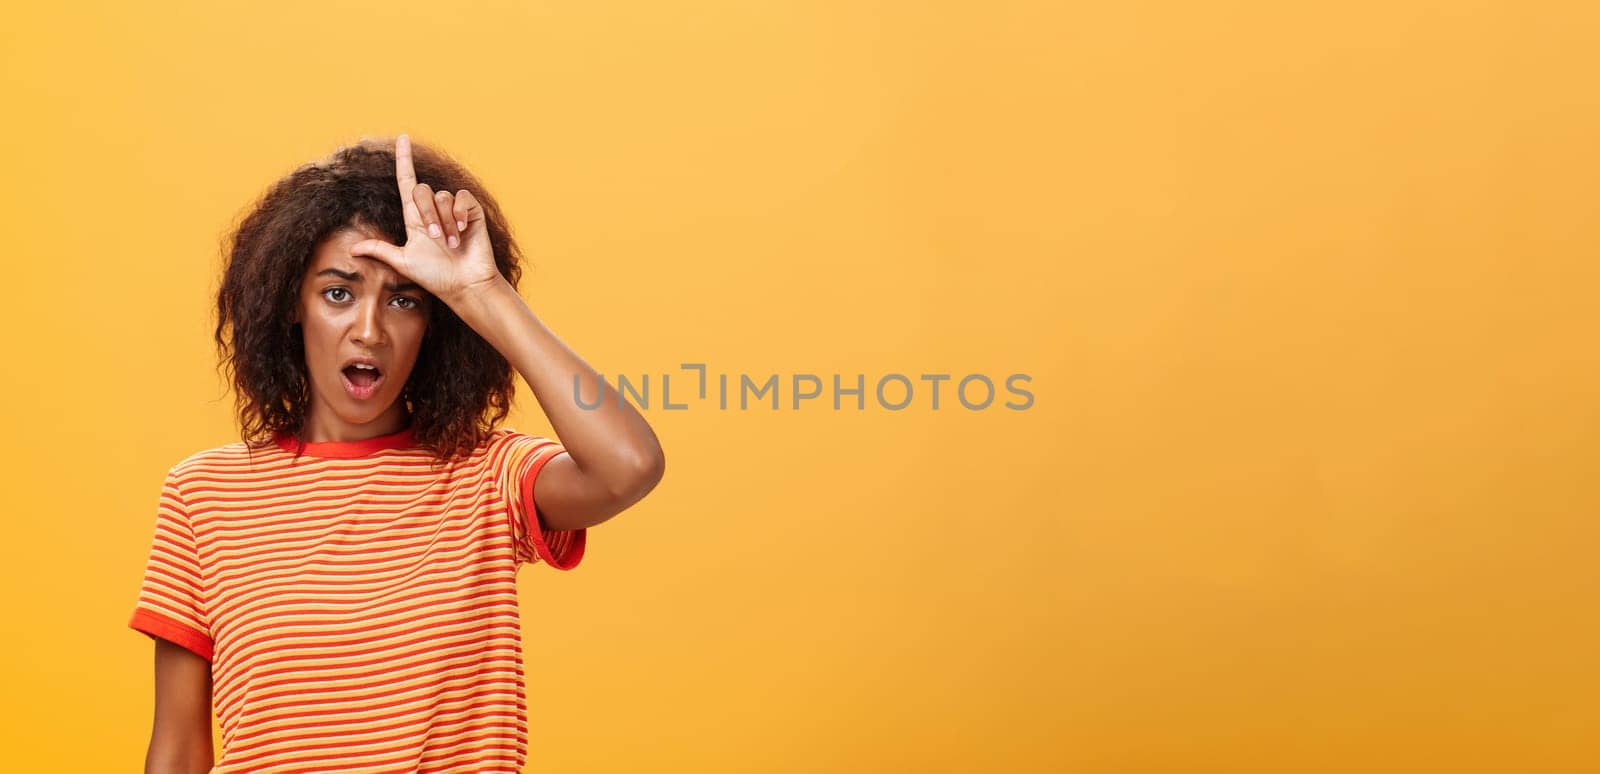 Girl thinks she loser. Portrait of gloomy bothered and displeased african american woman with afro hairstyle showing l word over forehead complaining feeling gloomy and unhappy over orange background.